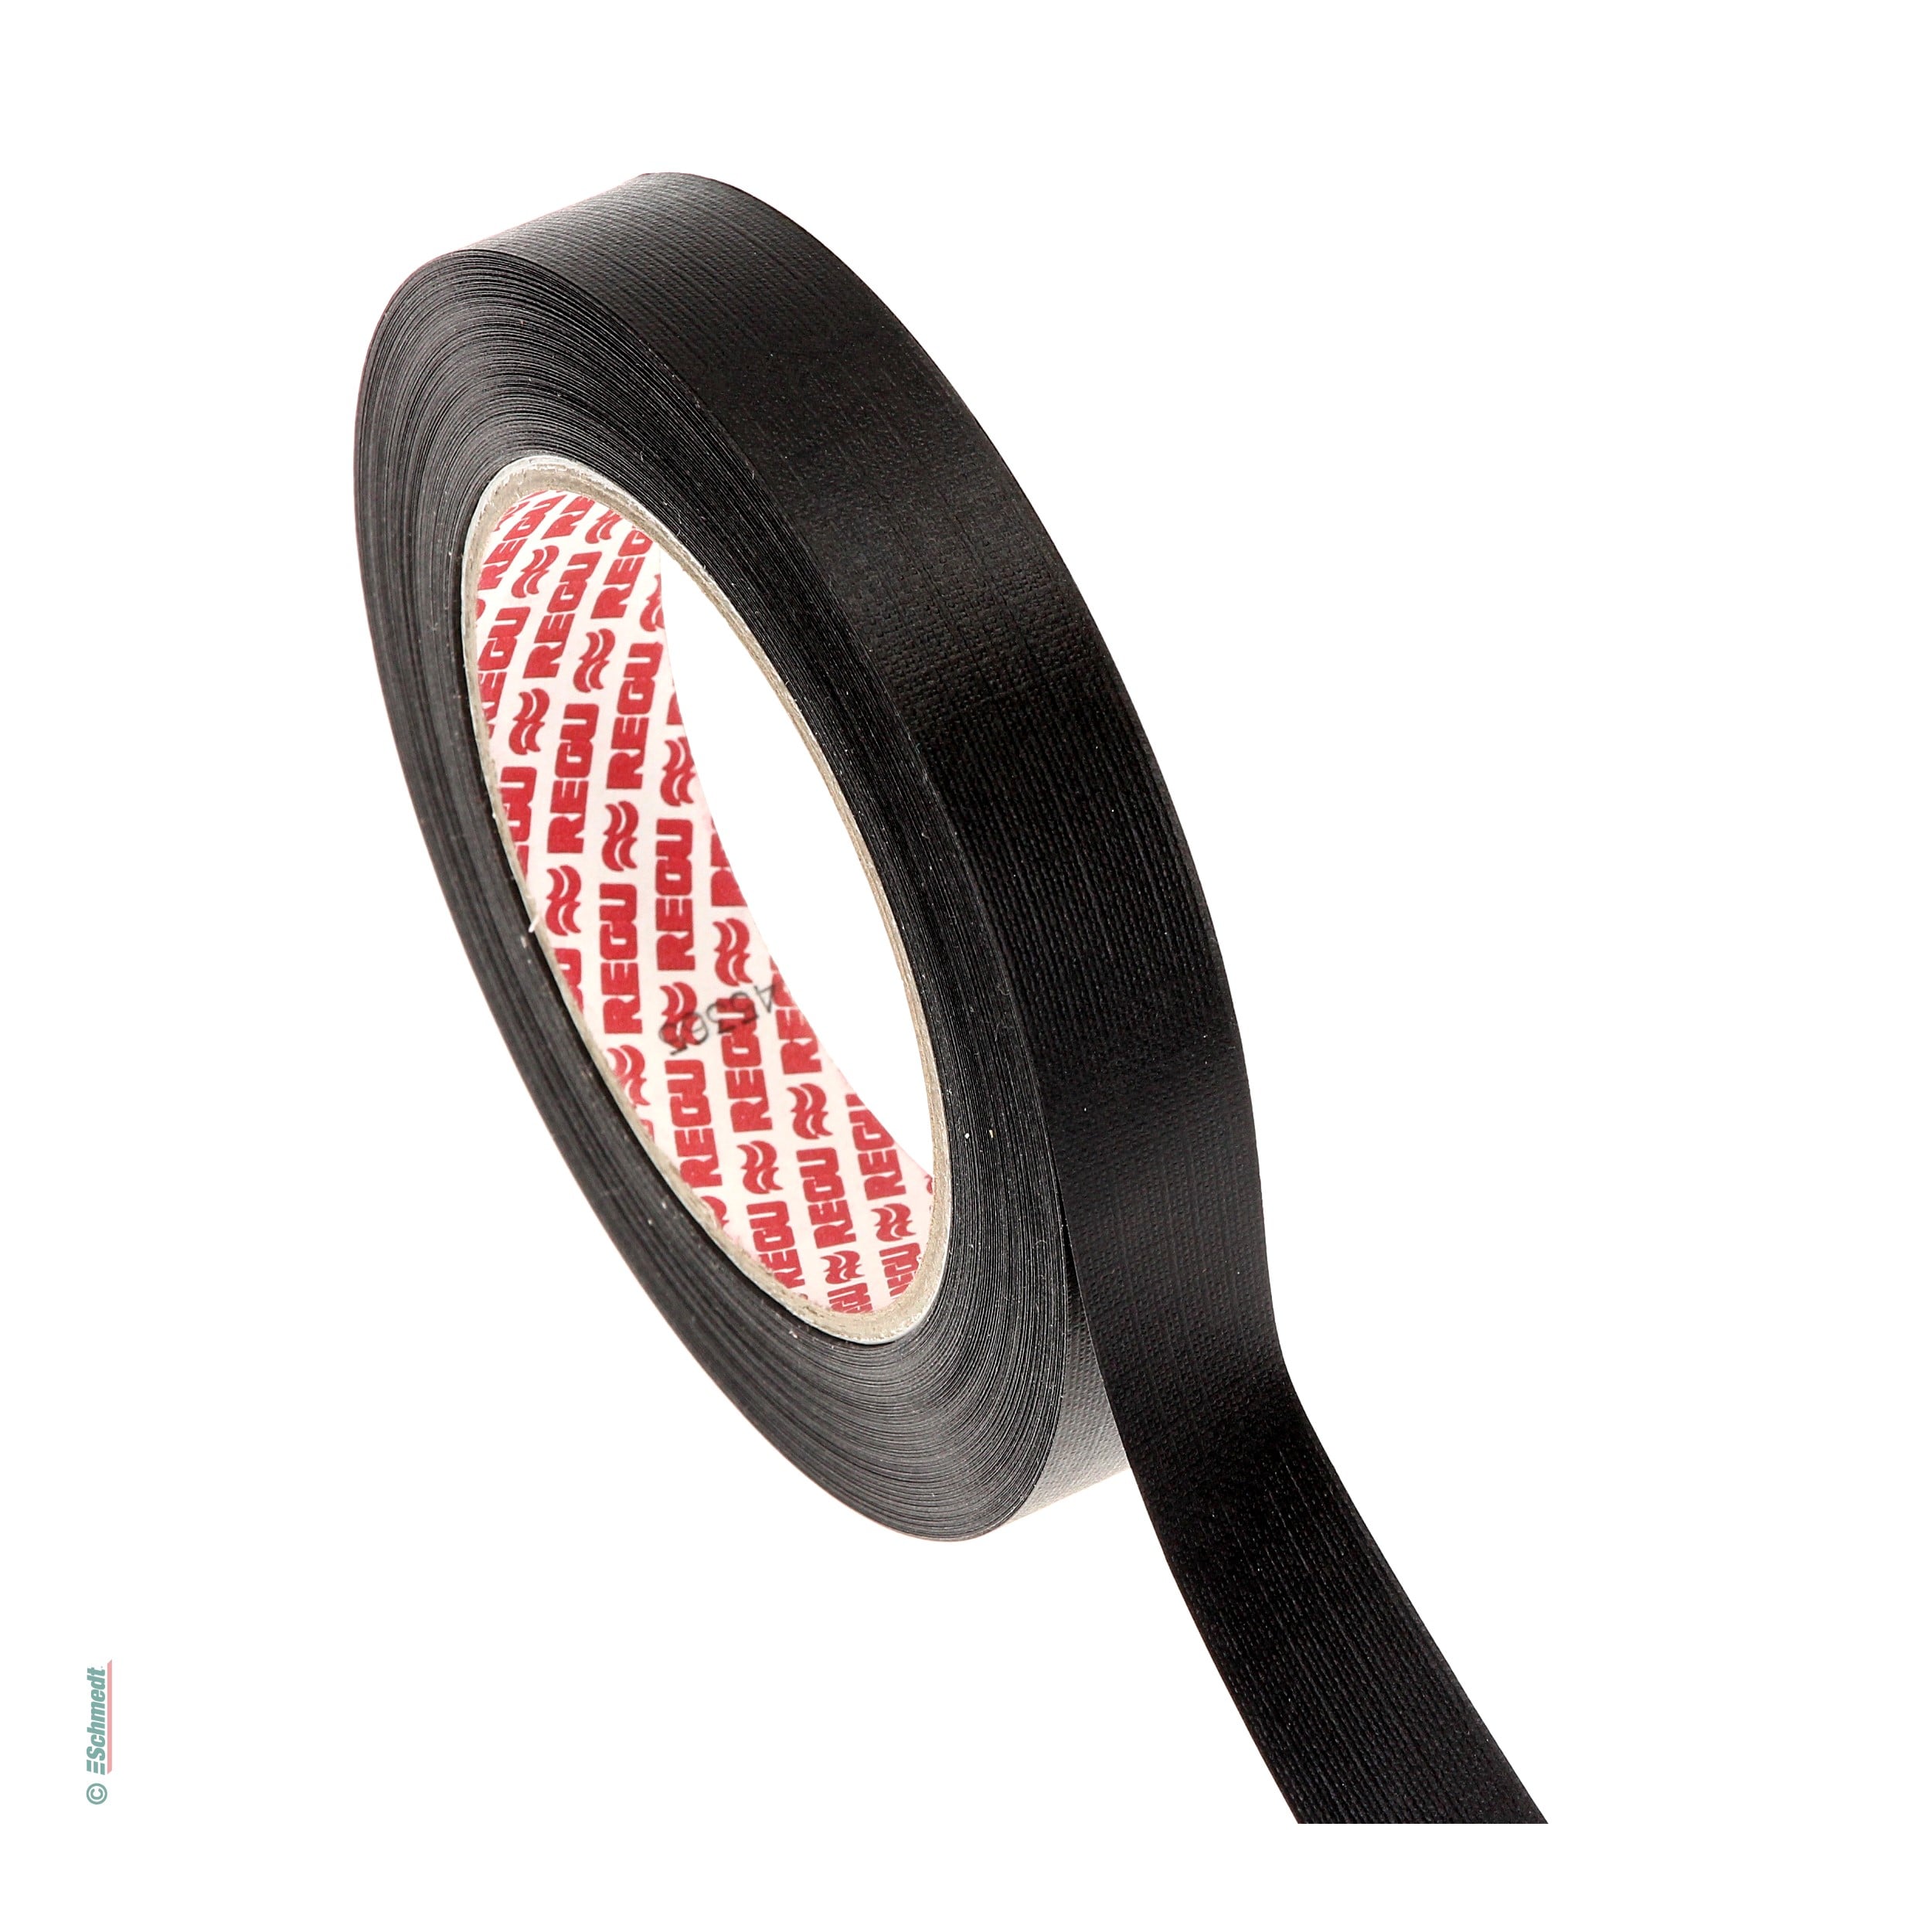 Regutaf H3 - self-adhesive spine-binding tape - Width (in mm) 38 - Colour black - to reinforce the spine of pre-glued or stapled brochures, ...